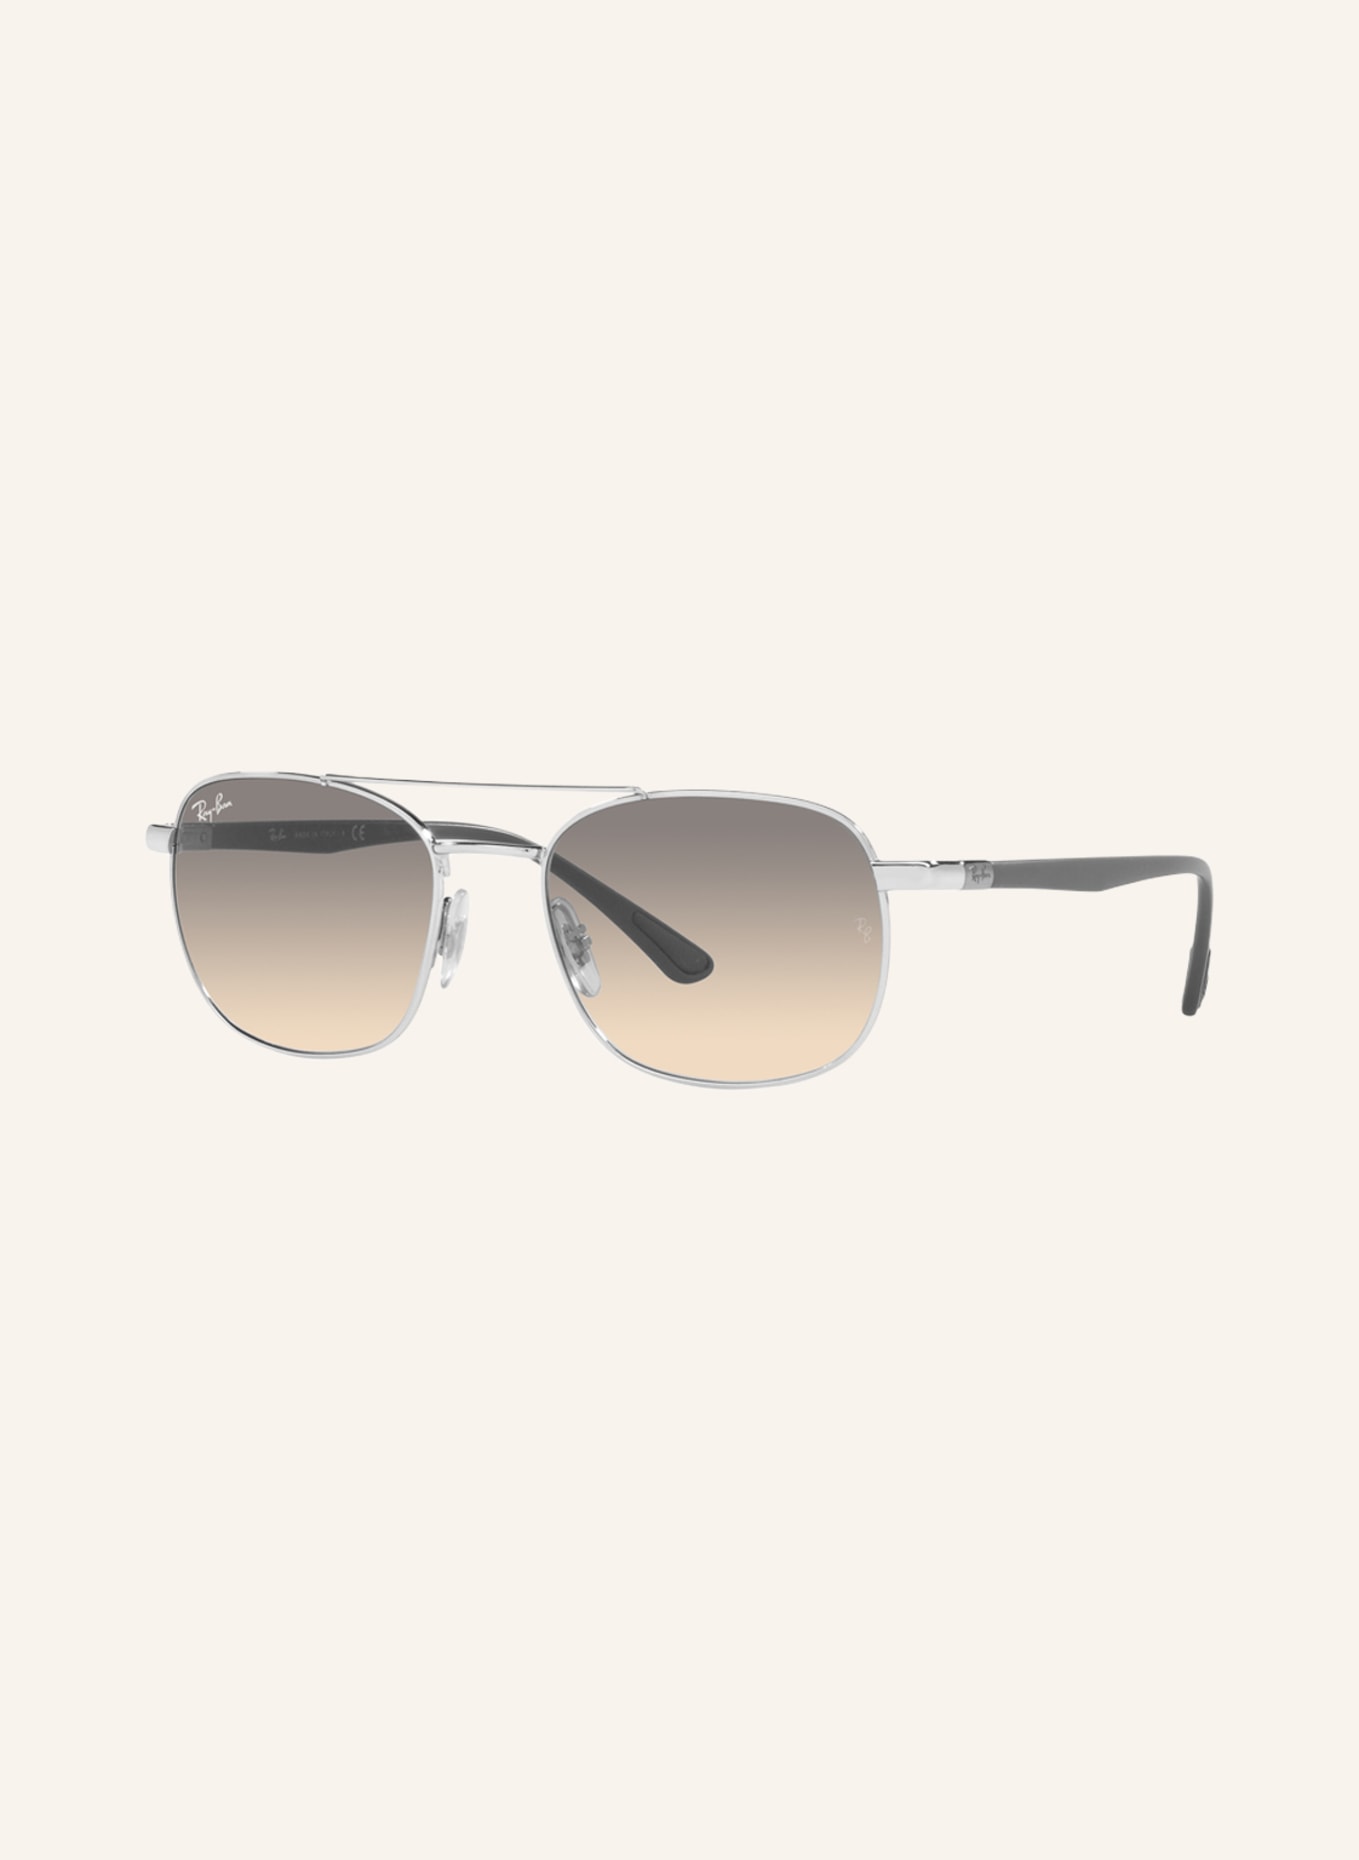 Ray-Ban Sunglasses RB3670, Color: 003/32 - SILVER/LIGHT GRAY GRADIENT (Image 1)